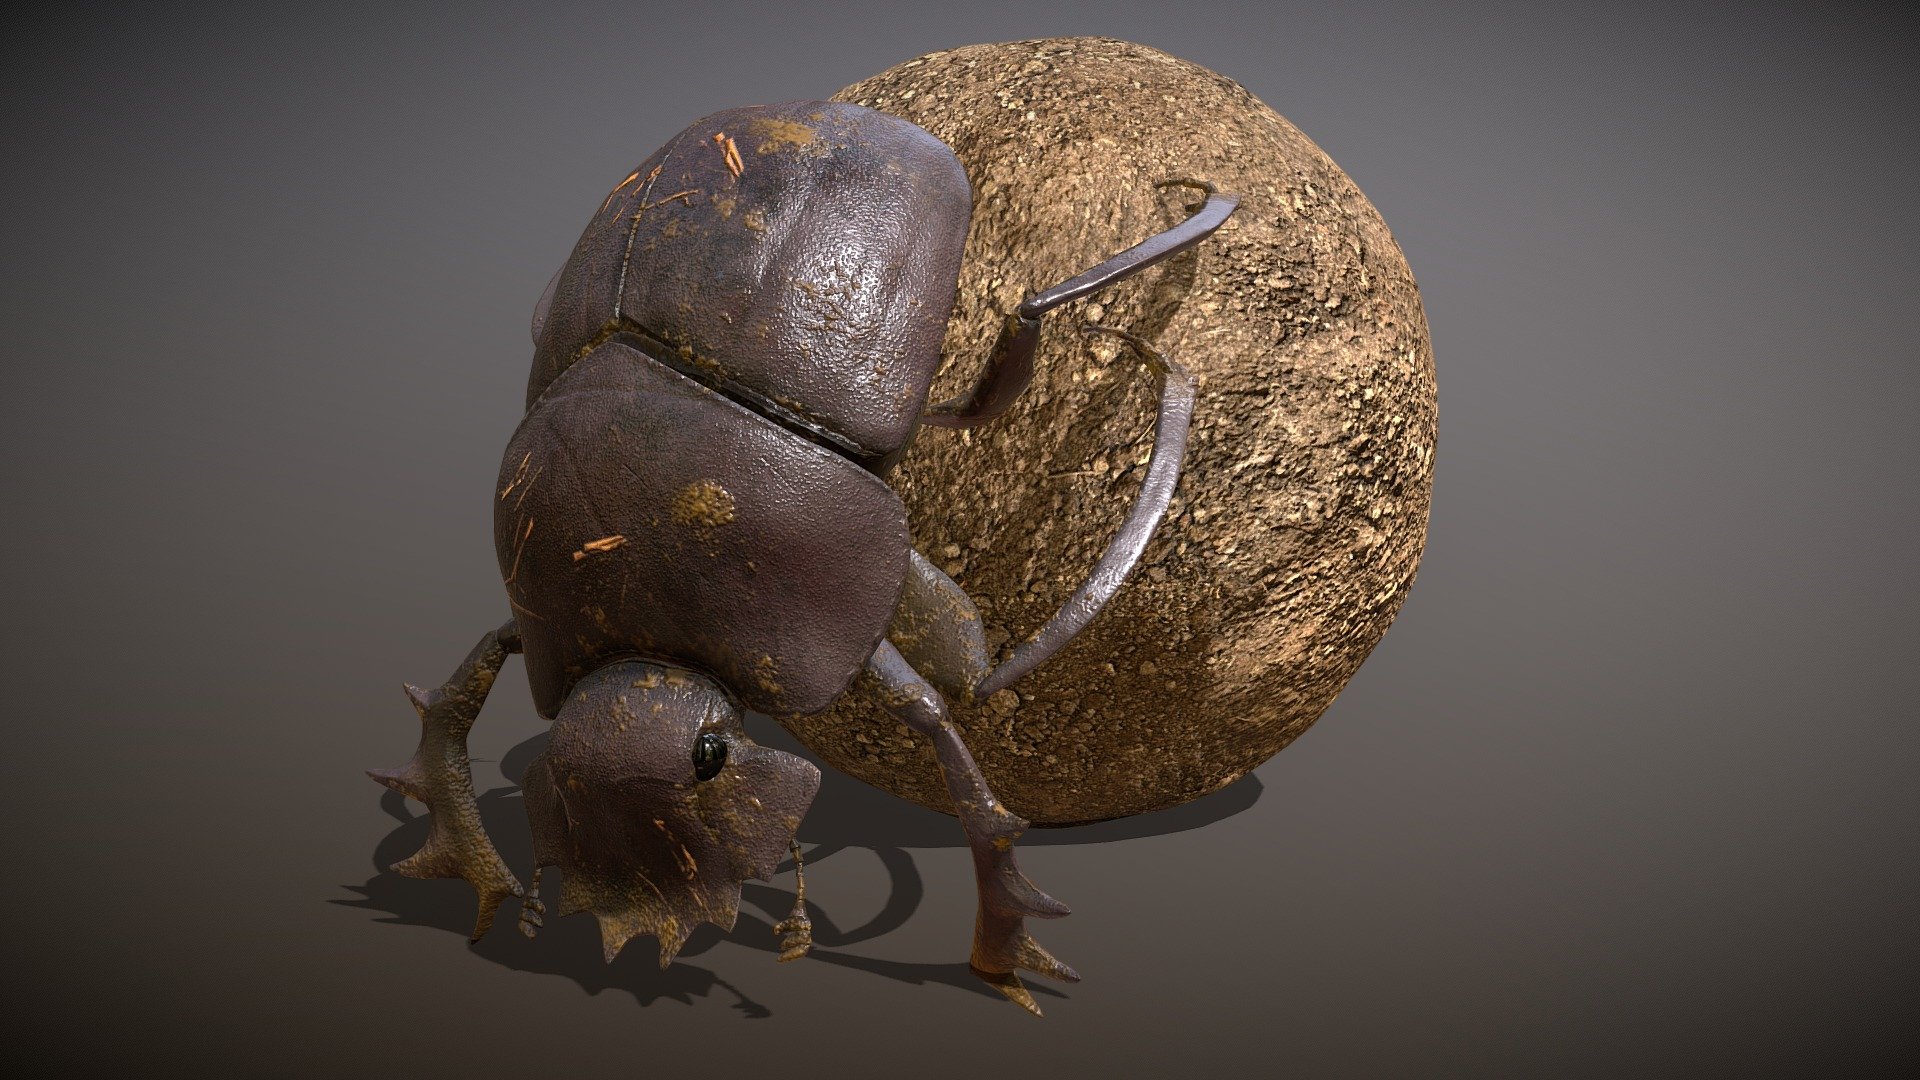 Animated Scarabaeus sacer, common name sacred scarab 


1 walking cycle animation
1 Idle cycle animation
4 transitions



Made with Blender and subtance painter


If you have any questions, do not hesitate to contact me.

 
 

 - Animated Dung beetle - Buy Royalty Free 3D model by Zacxophone 3d model